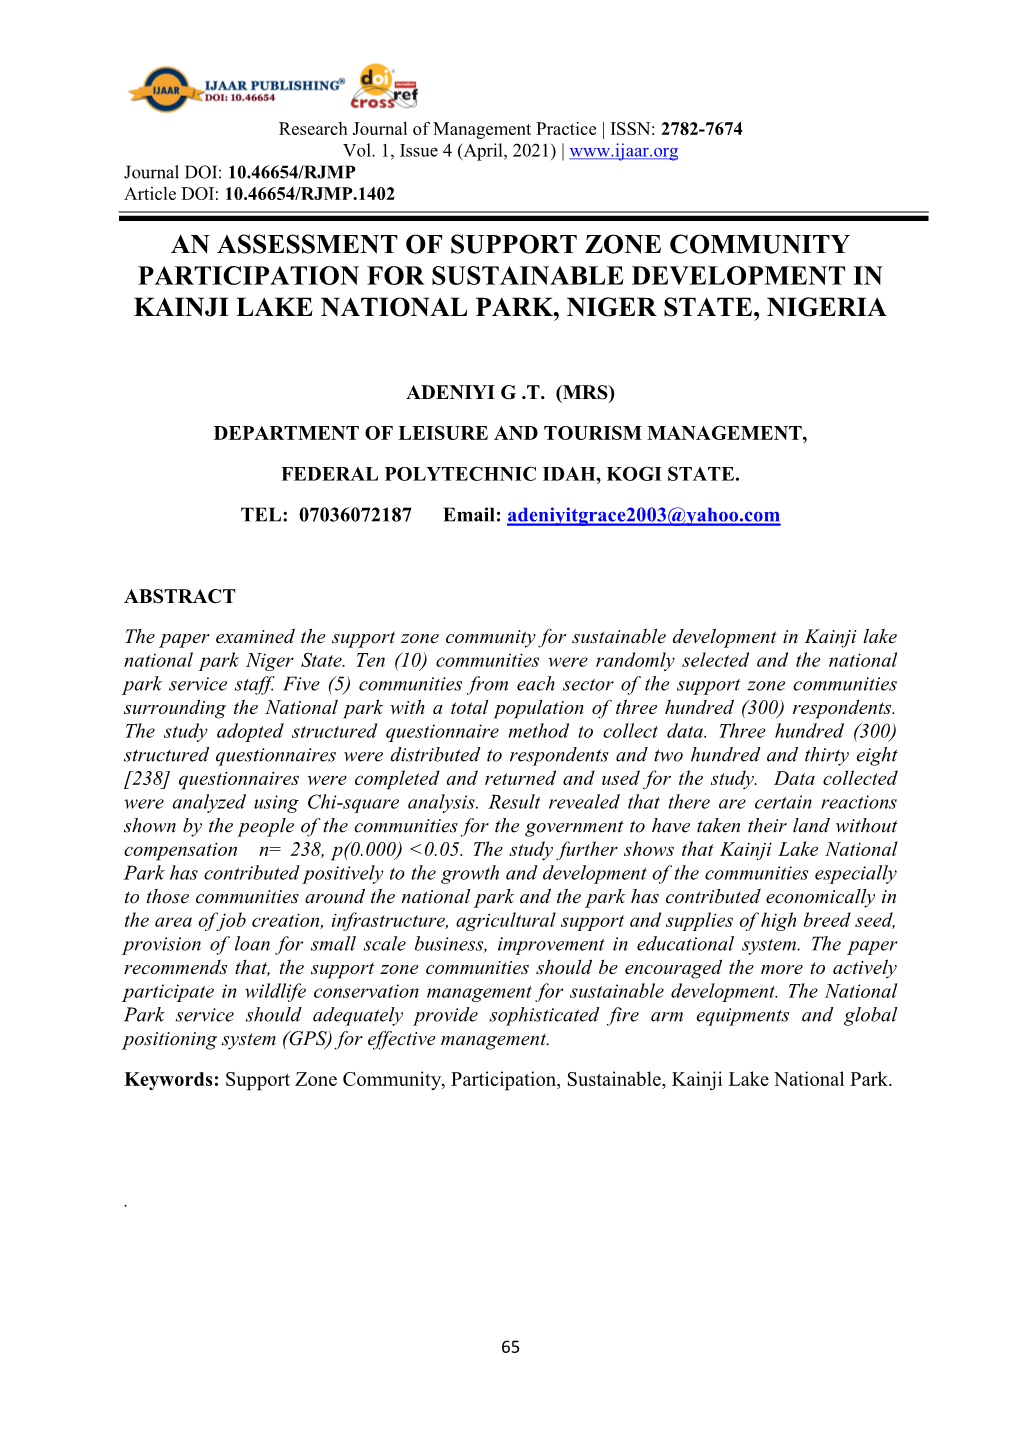 An Assessment of Support Zone Community Participation for Sustainable Development in Kainji Lake National Park, Niger State, Nigeria